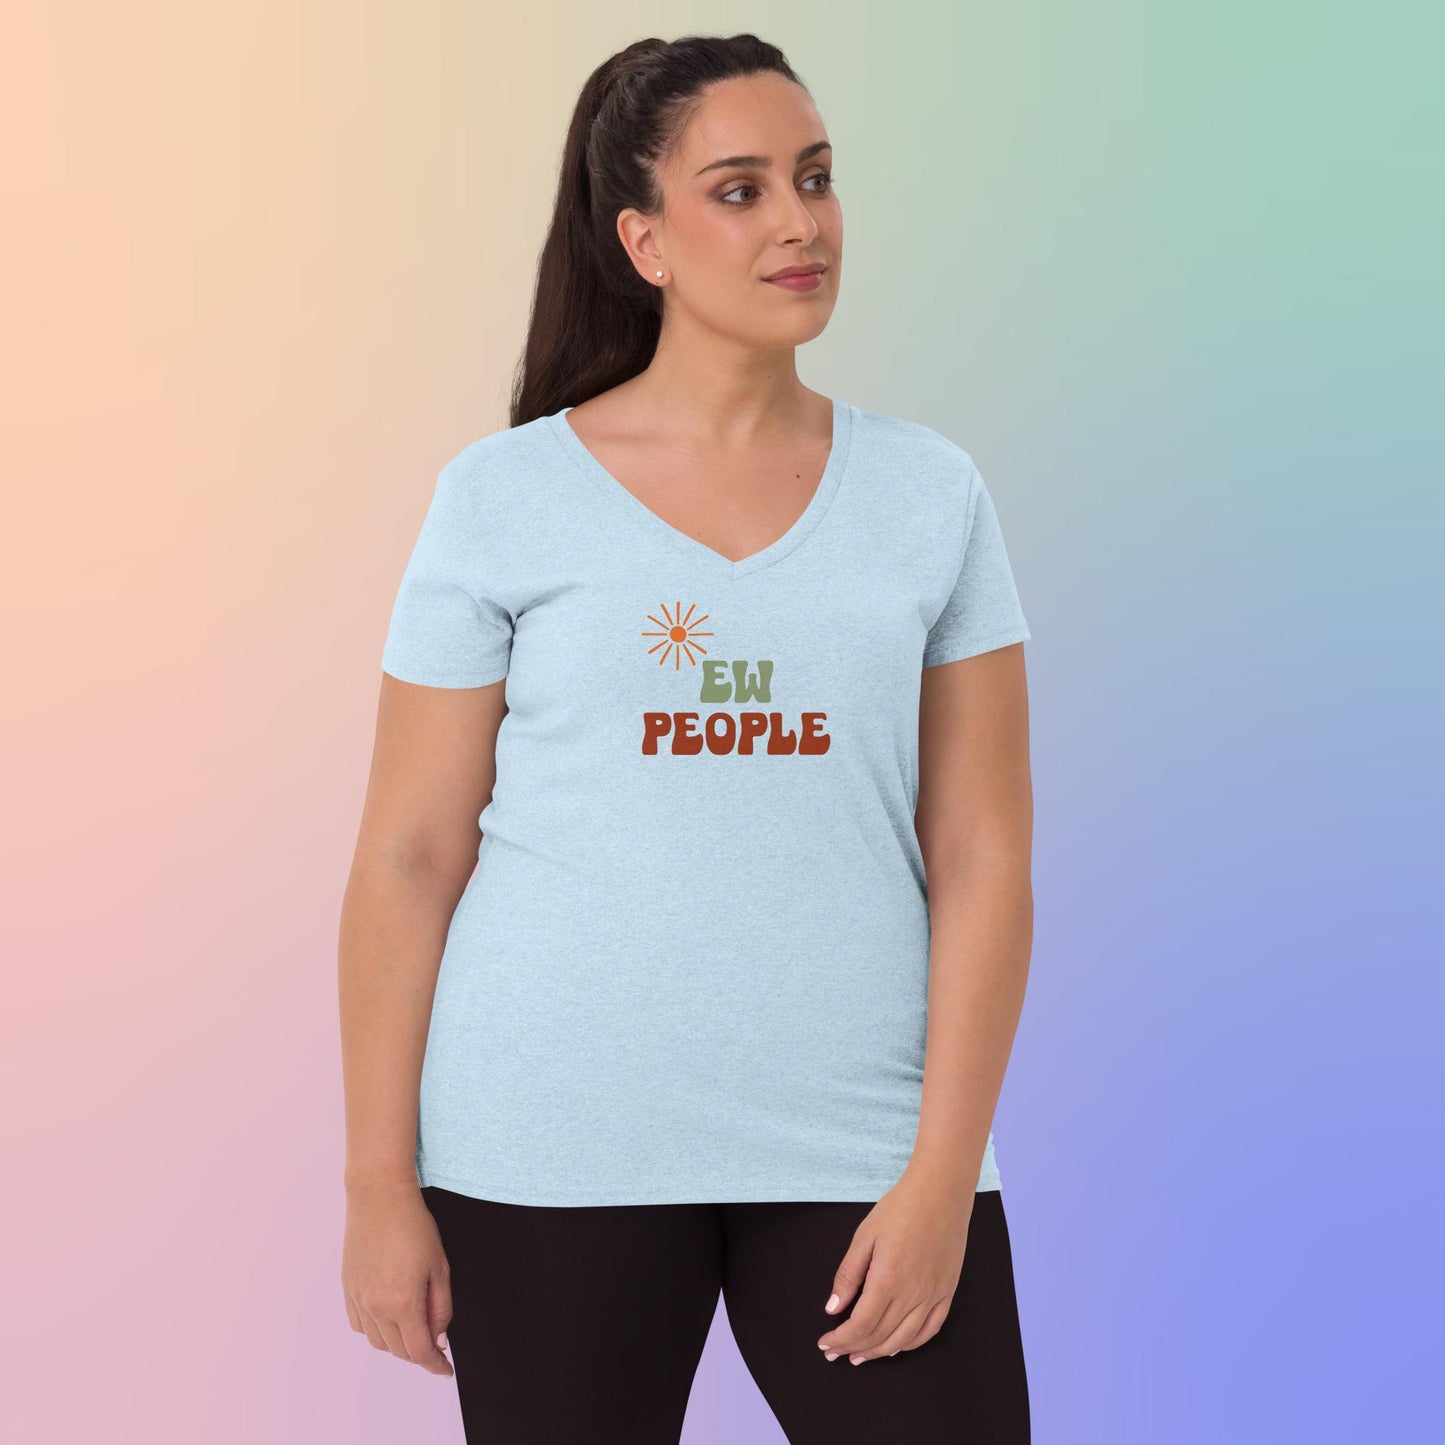 Ew, People - Women’s recycled v-neck t-shirt